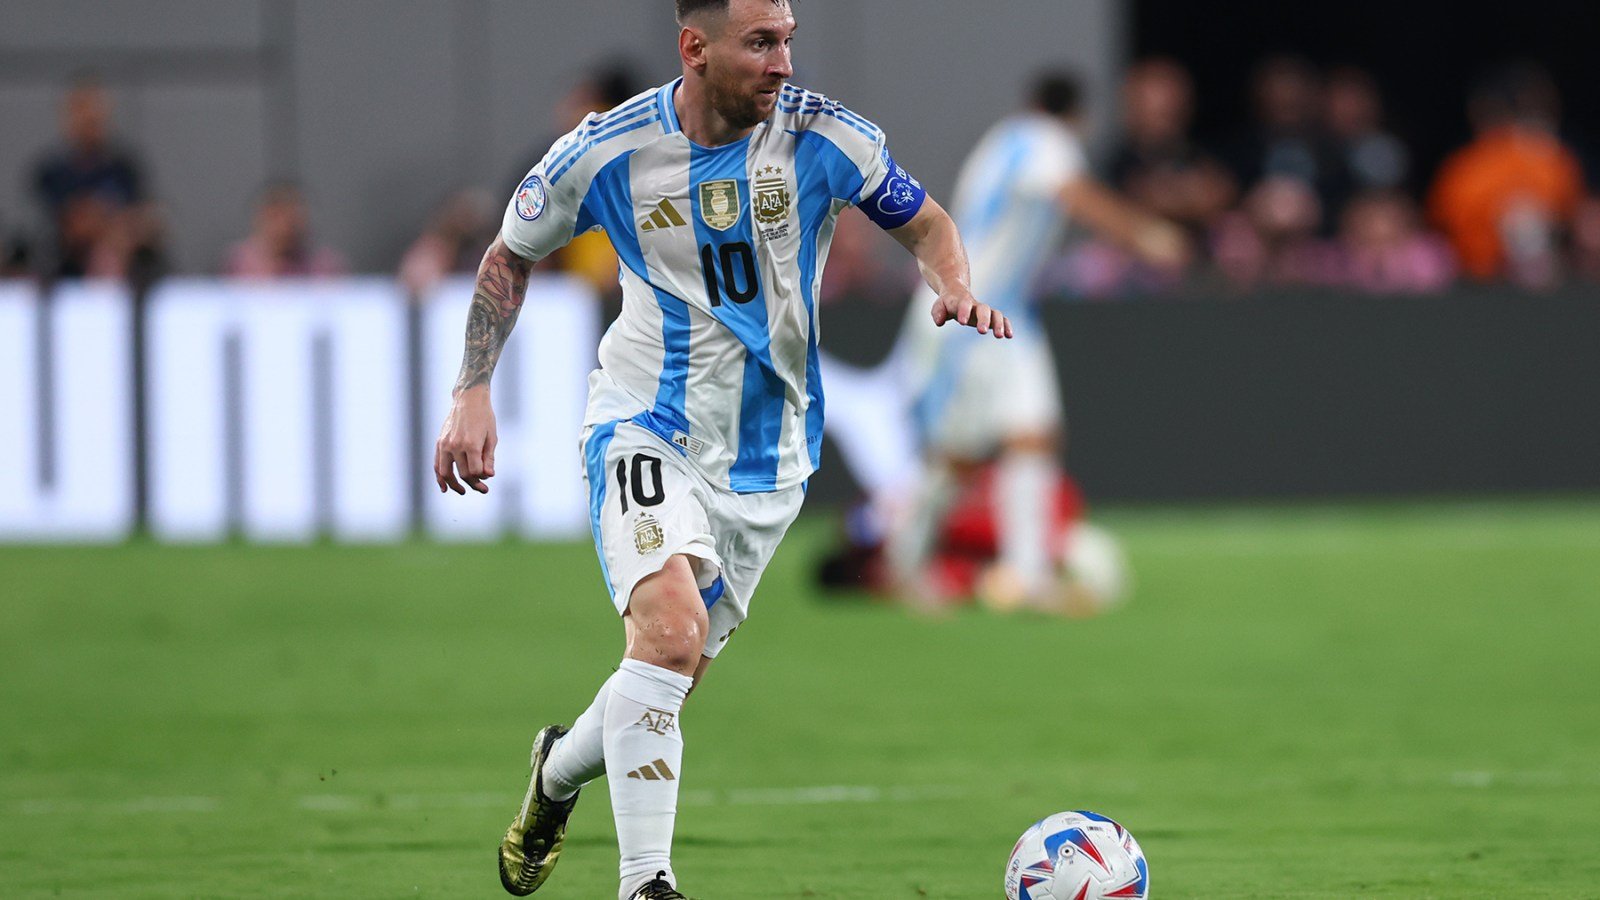 Argentina vs. Colombia Livestream: How to Watch the Copa America Final Online